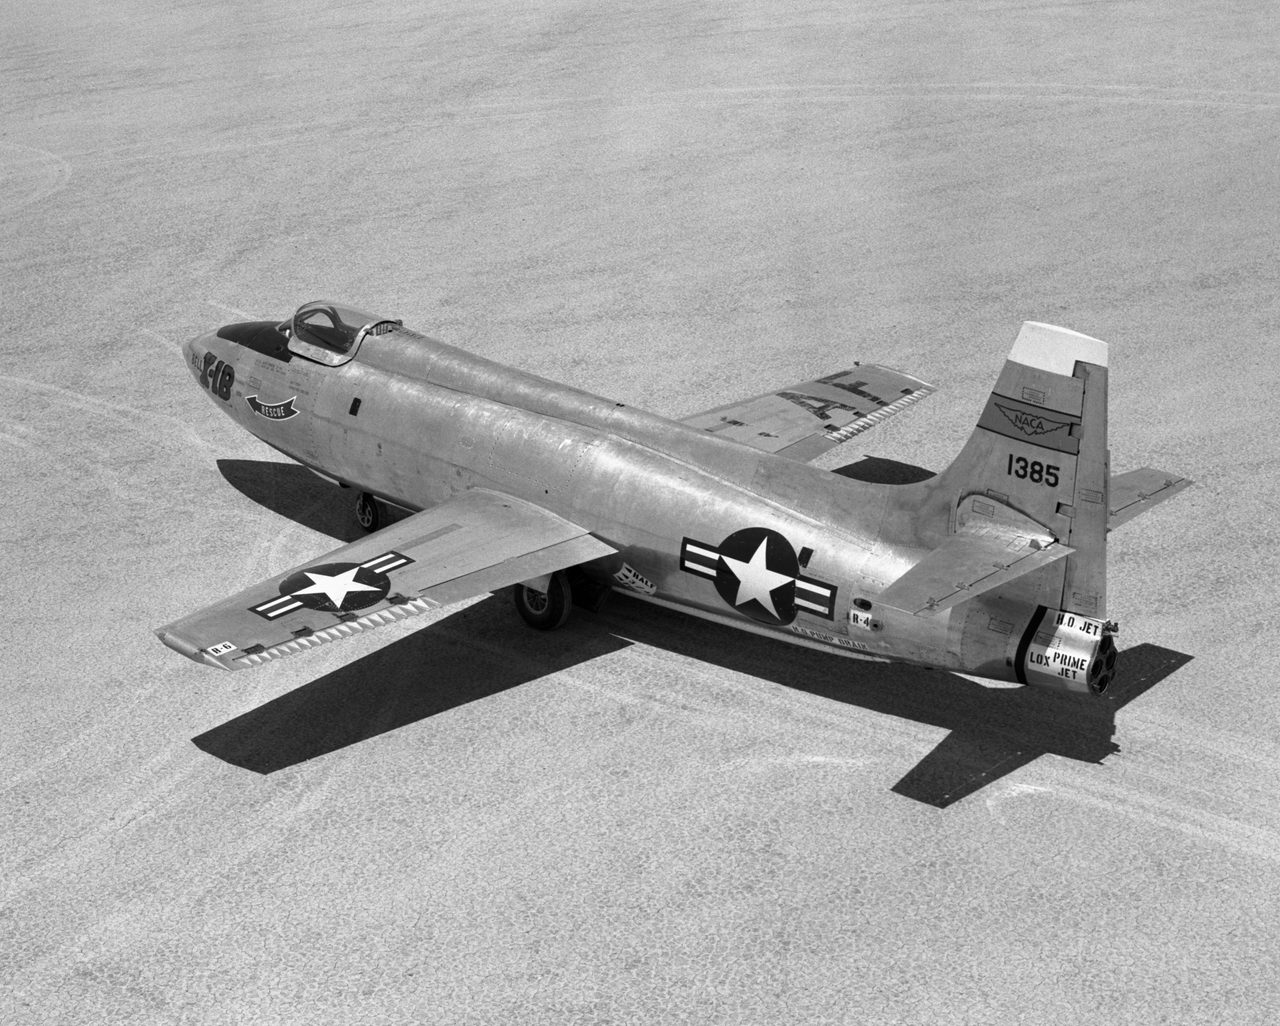 Bell X-1B 46-1385 parked on Rogers Dry Lake, 30 July 1958. (NASA)